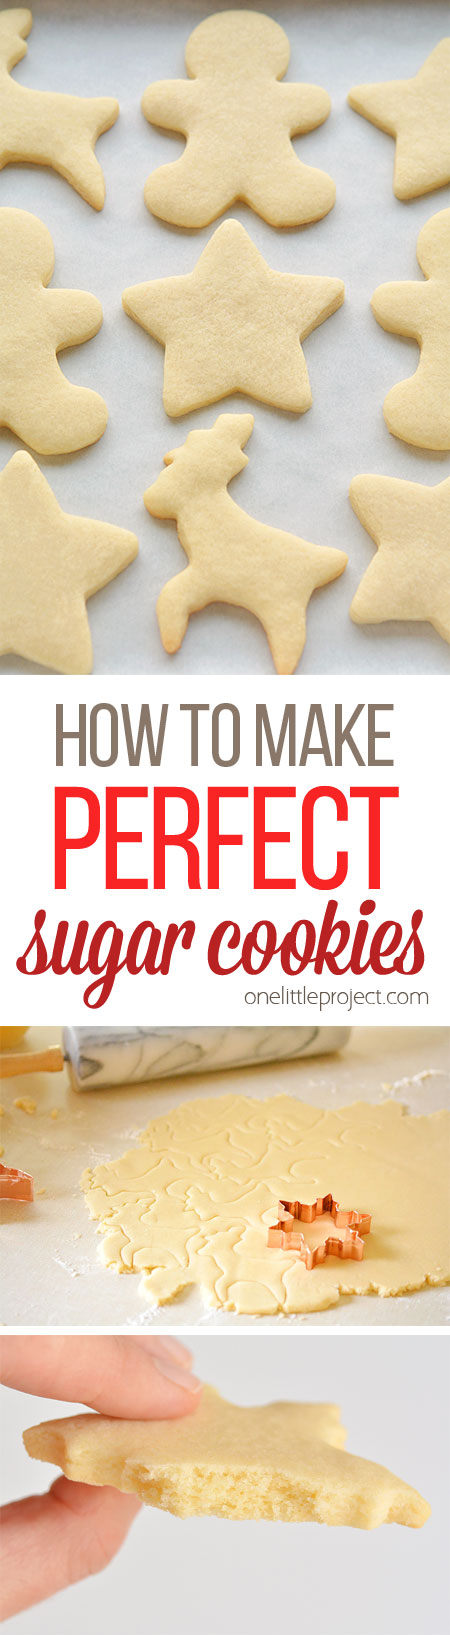 This recipe makes PERFECT sugar cookies! They're delicious both with and without icing, they keep their shape, have perfect edges every time and you don't need to chill the dough!